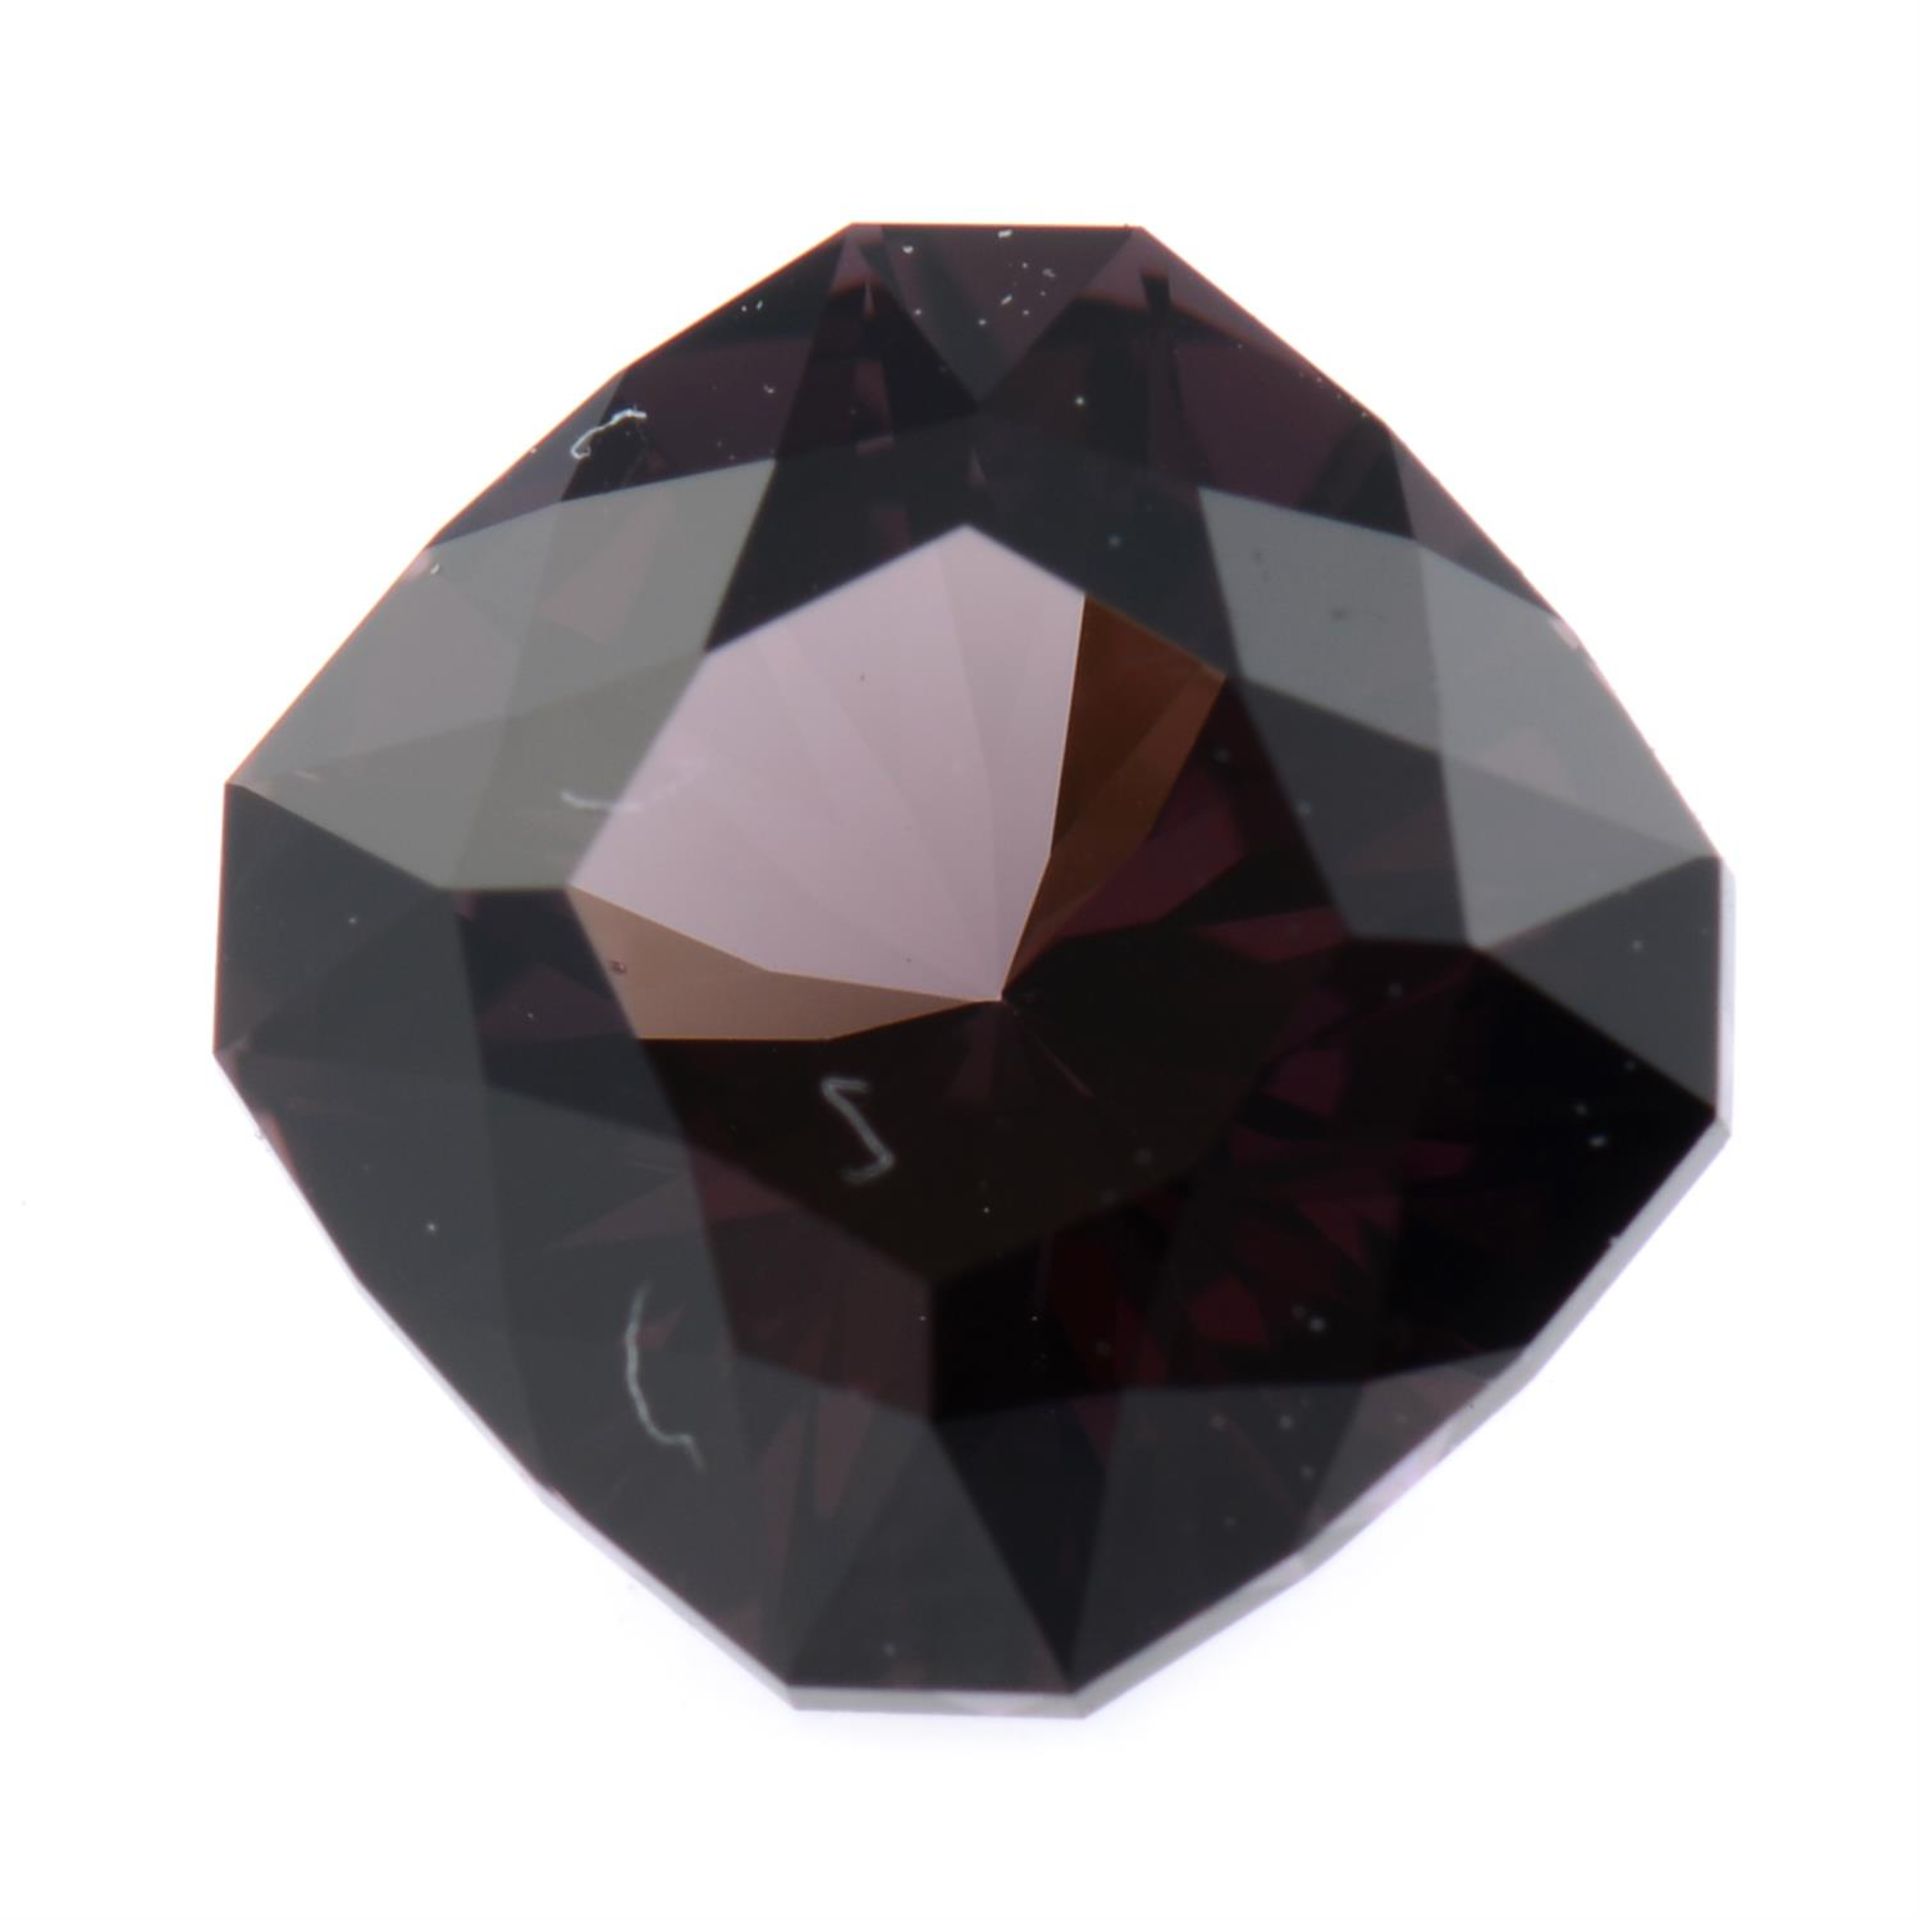 Square fancy-shape spinel, 1.20ct